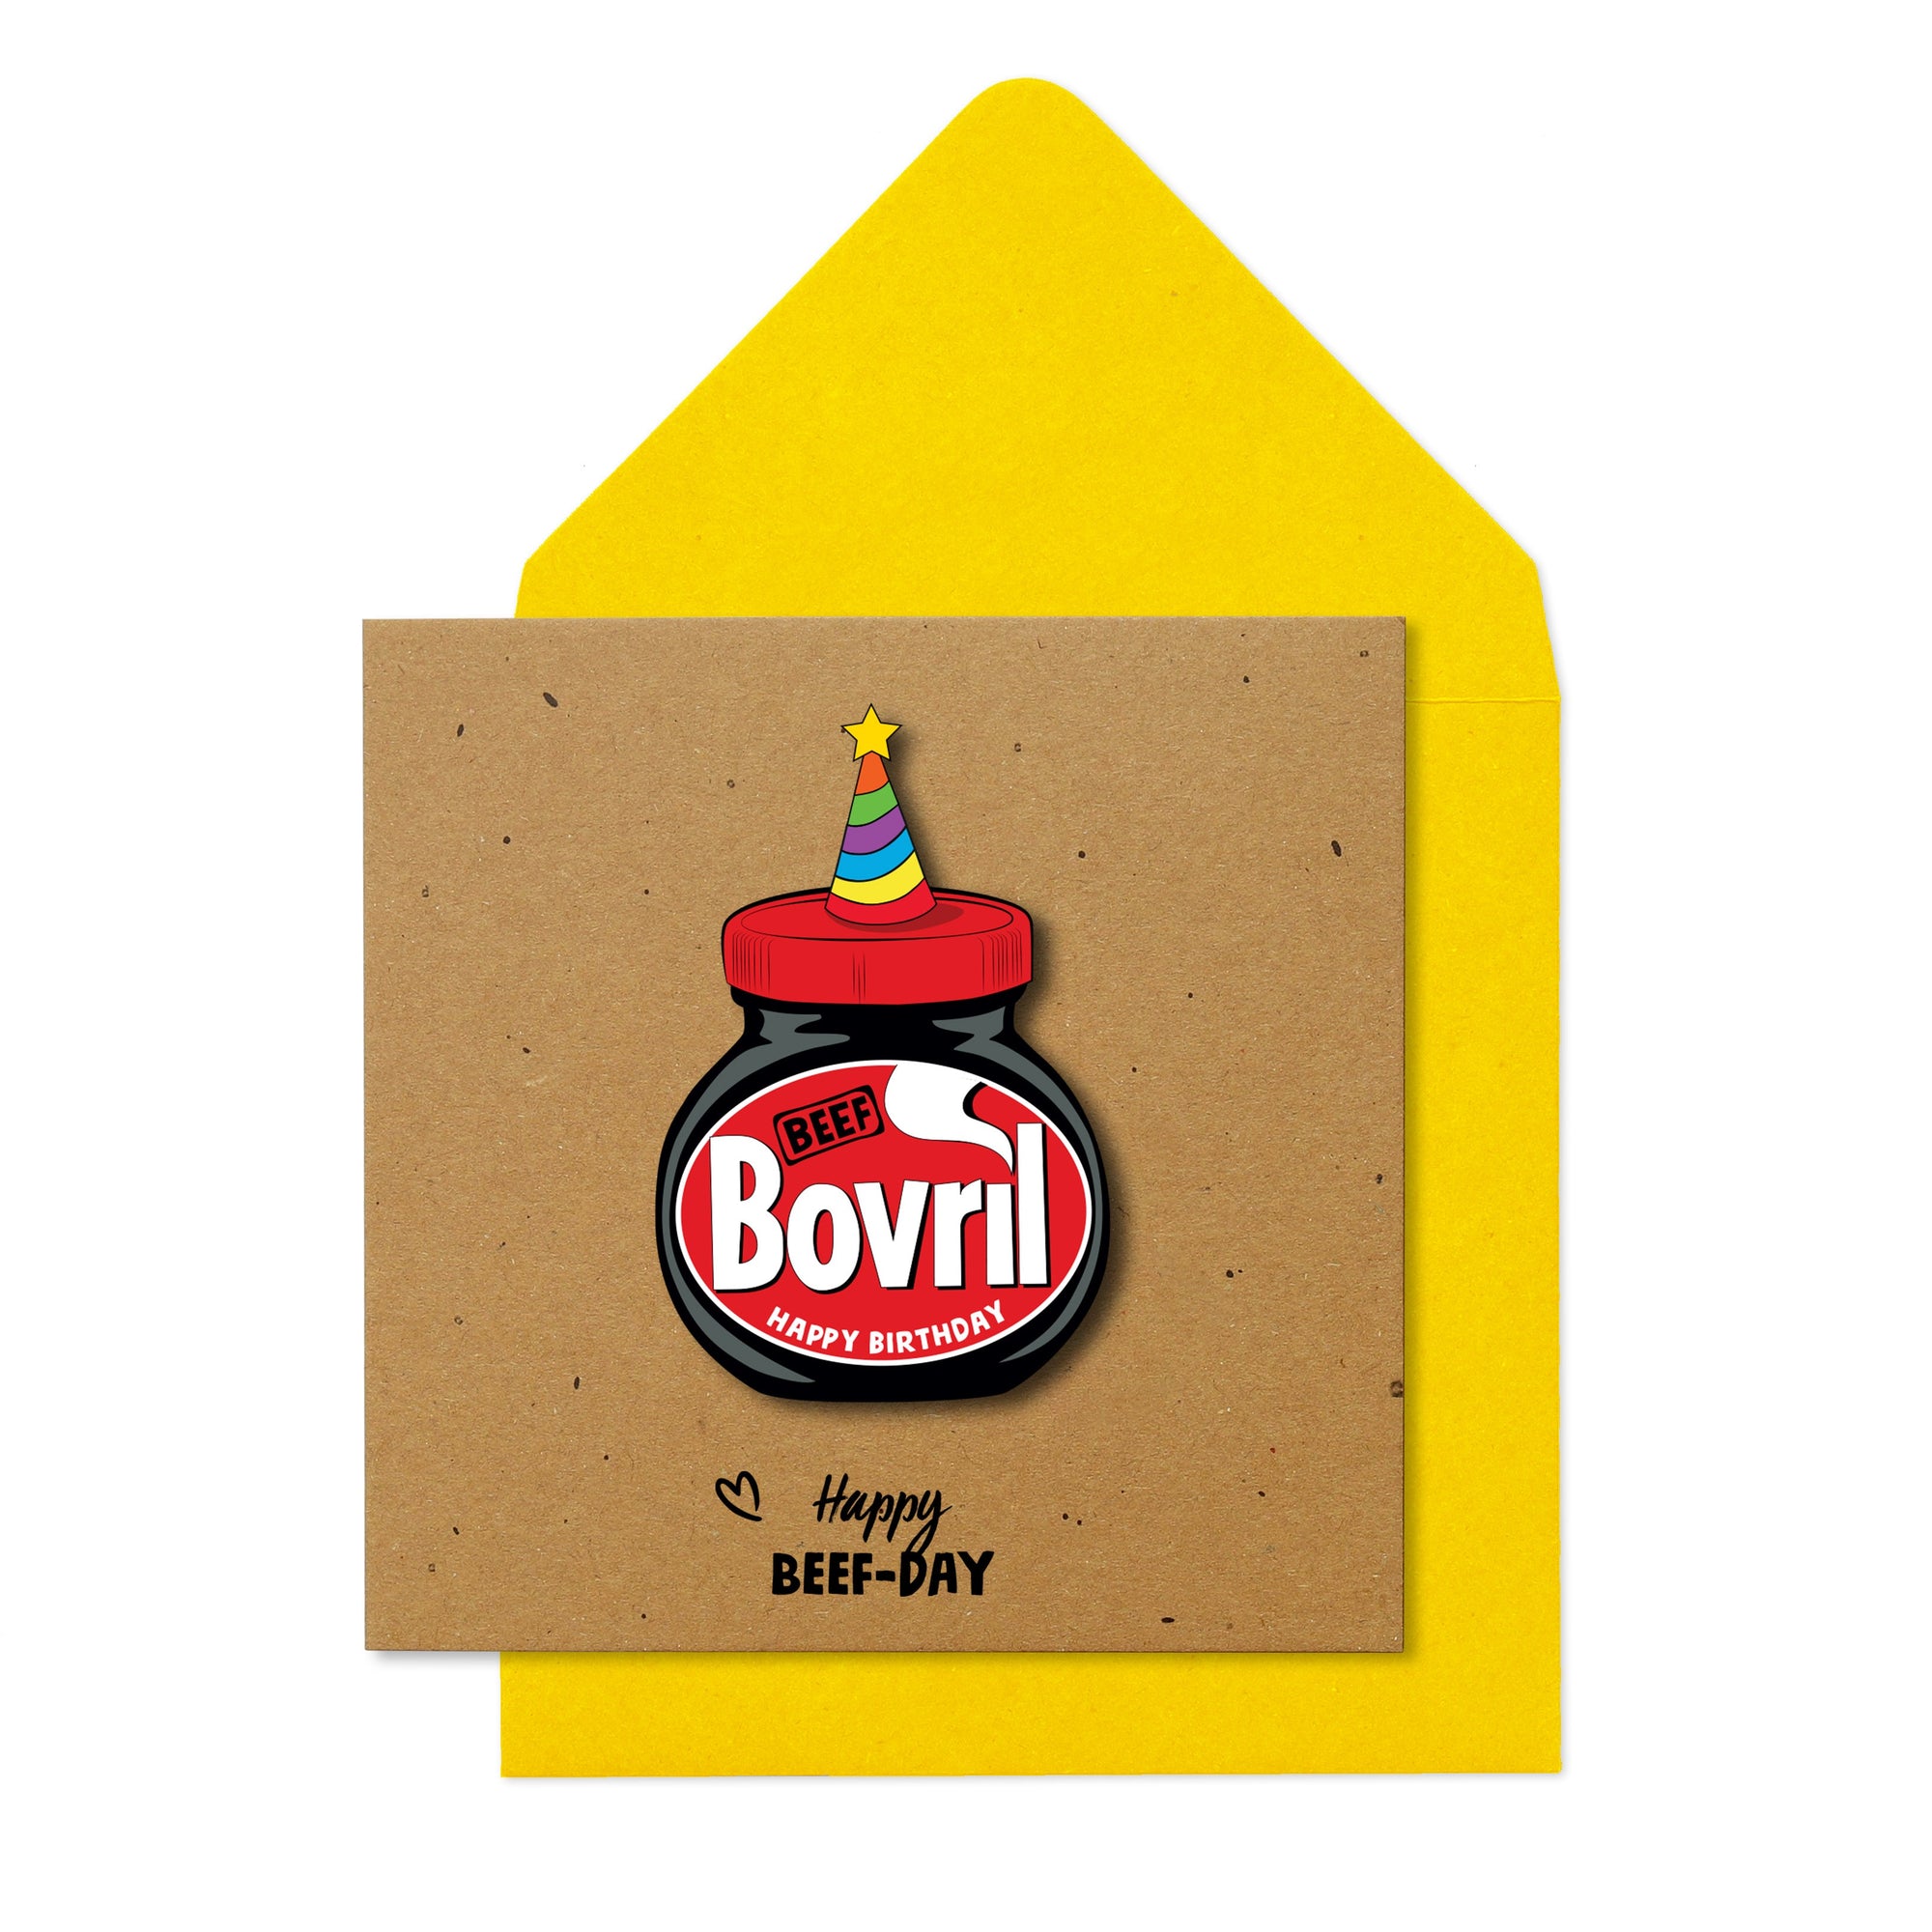 Happy Beef-day' Bovril